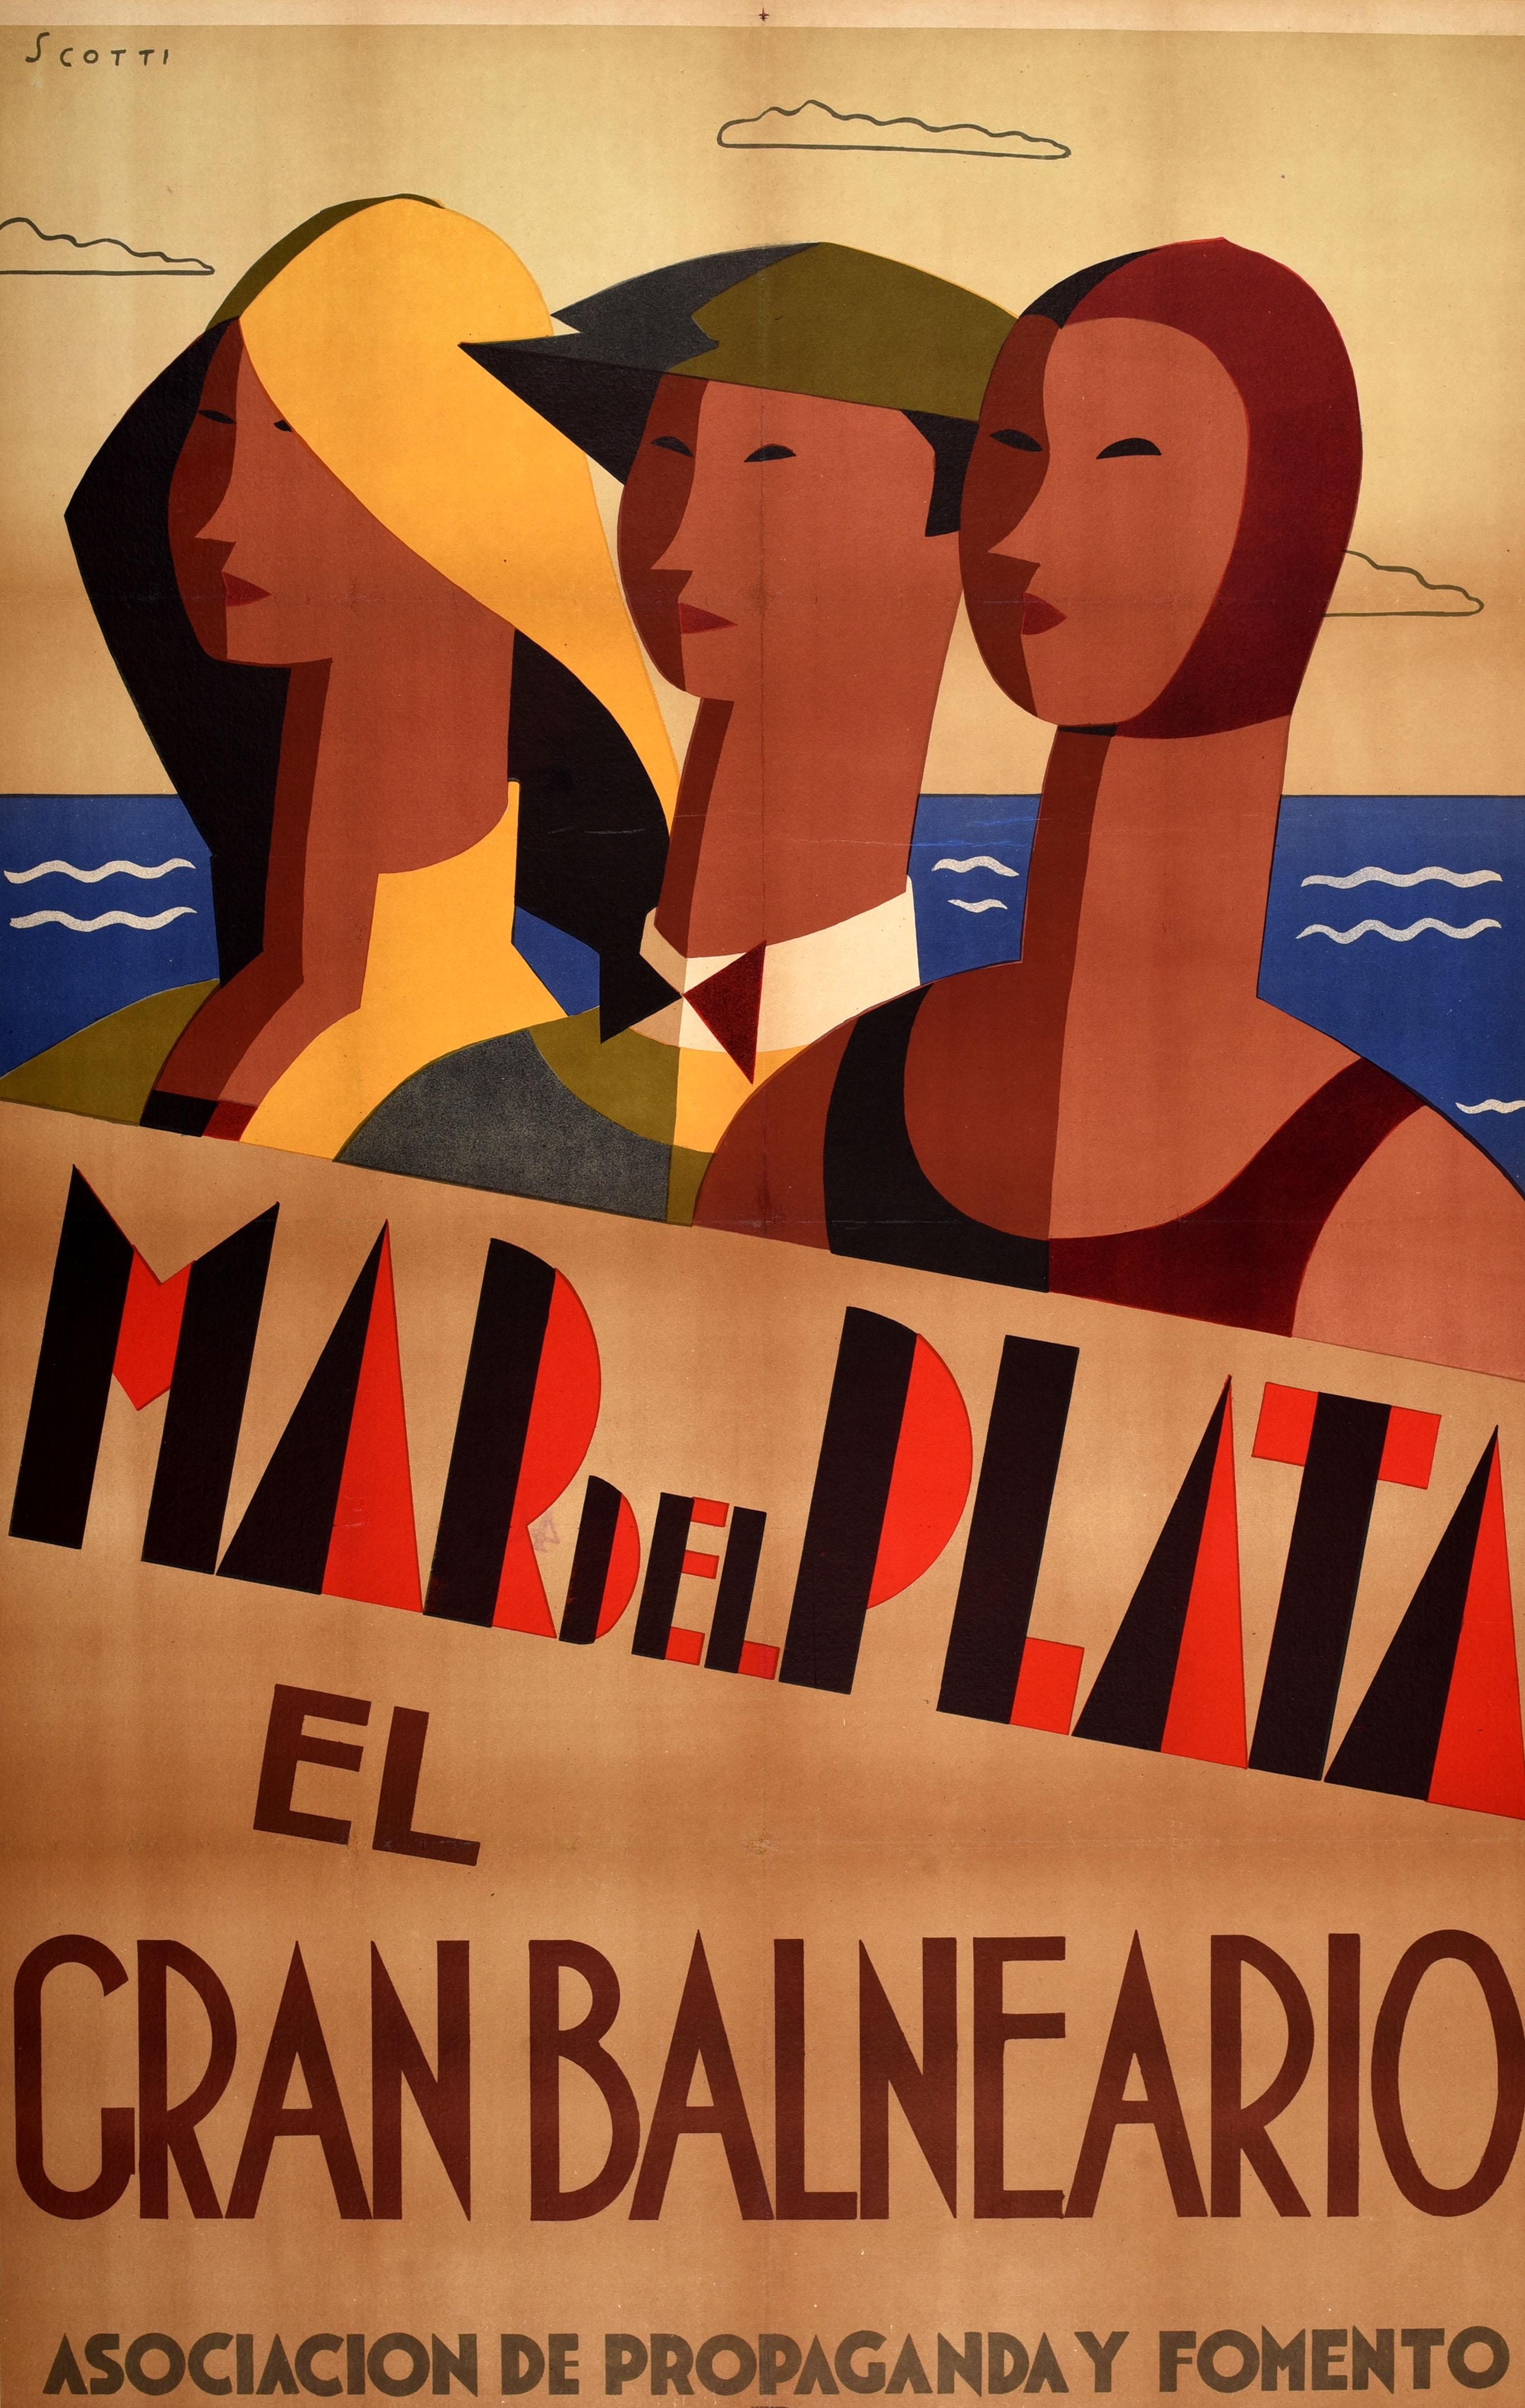 Original vintage travel poster for Mar Del Plata El Gran Balneario / The Great Spa featuring a dynamic Art Deco design by the Argentine painter Ernesto Scotti (1901-1957) depicting three people on a beach with the blue sea and clouds in the